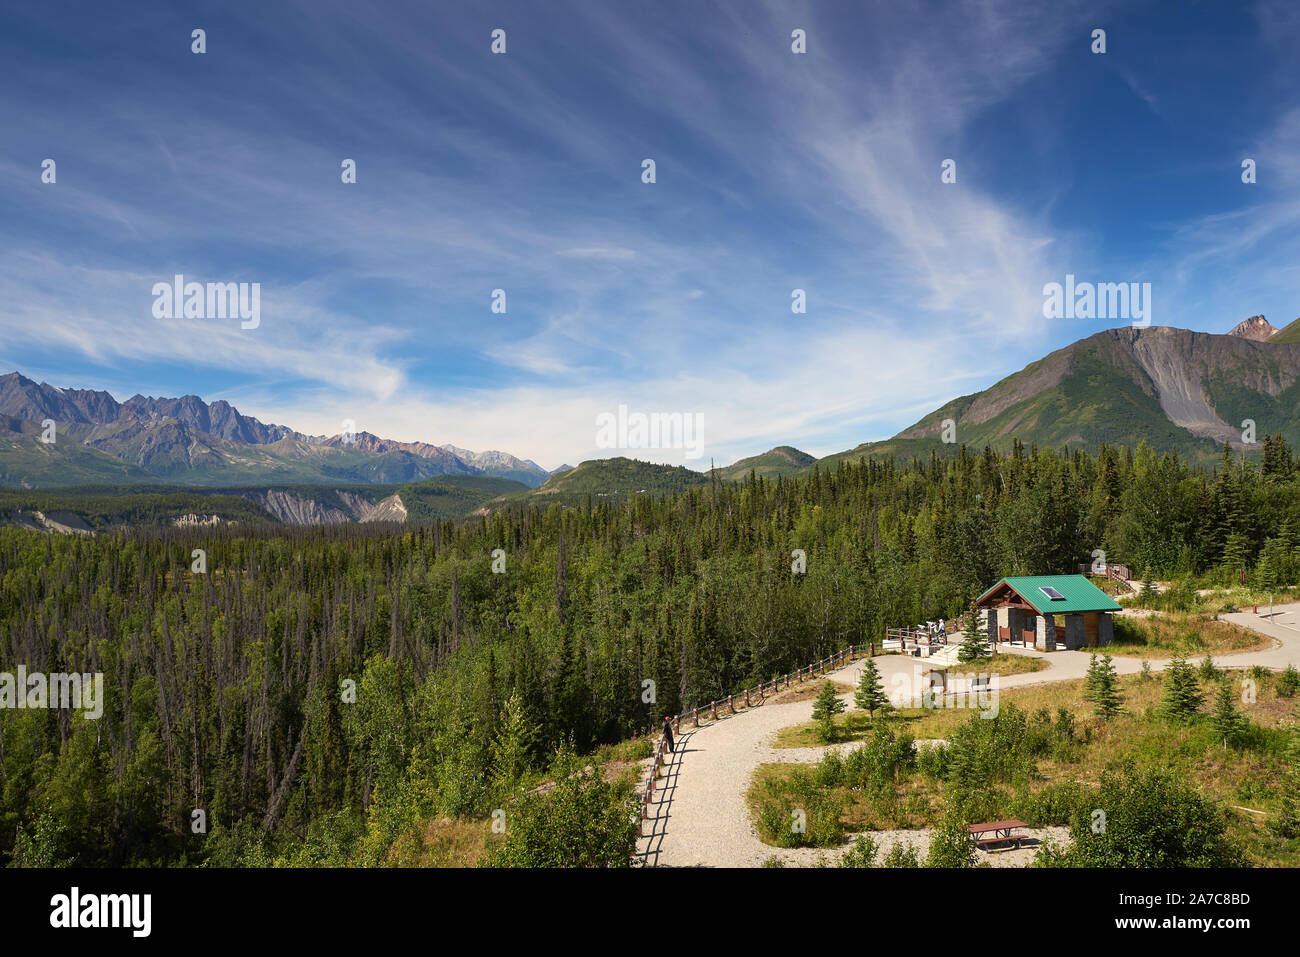 View of Matanuska Glacier State Recreation Site and an observation deck, with the Chugach Mountains in the background. Stock Photo